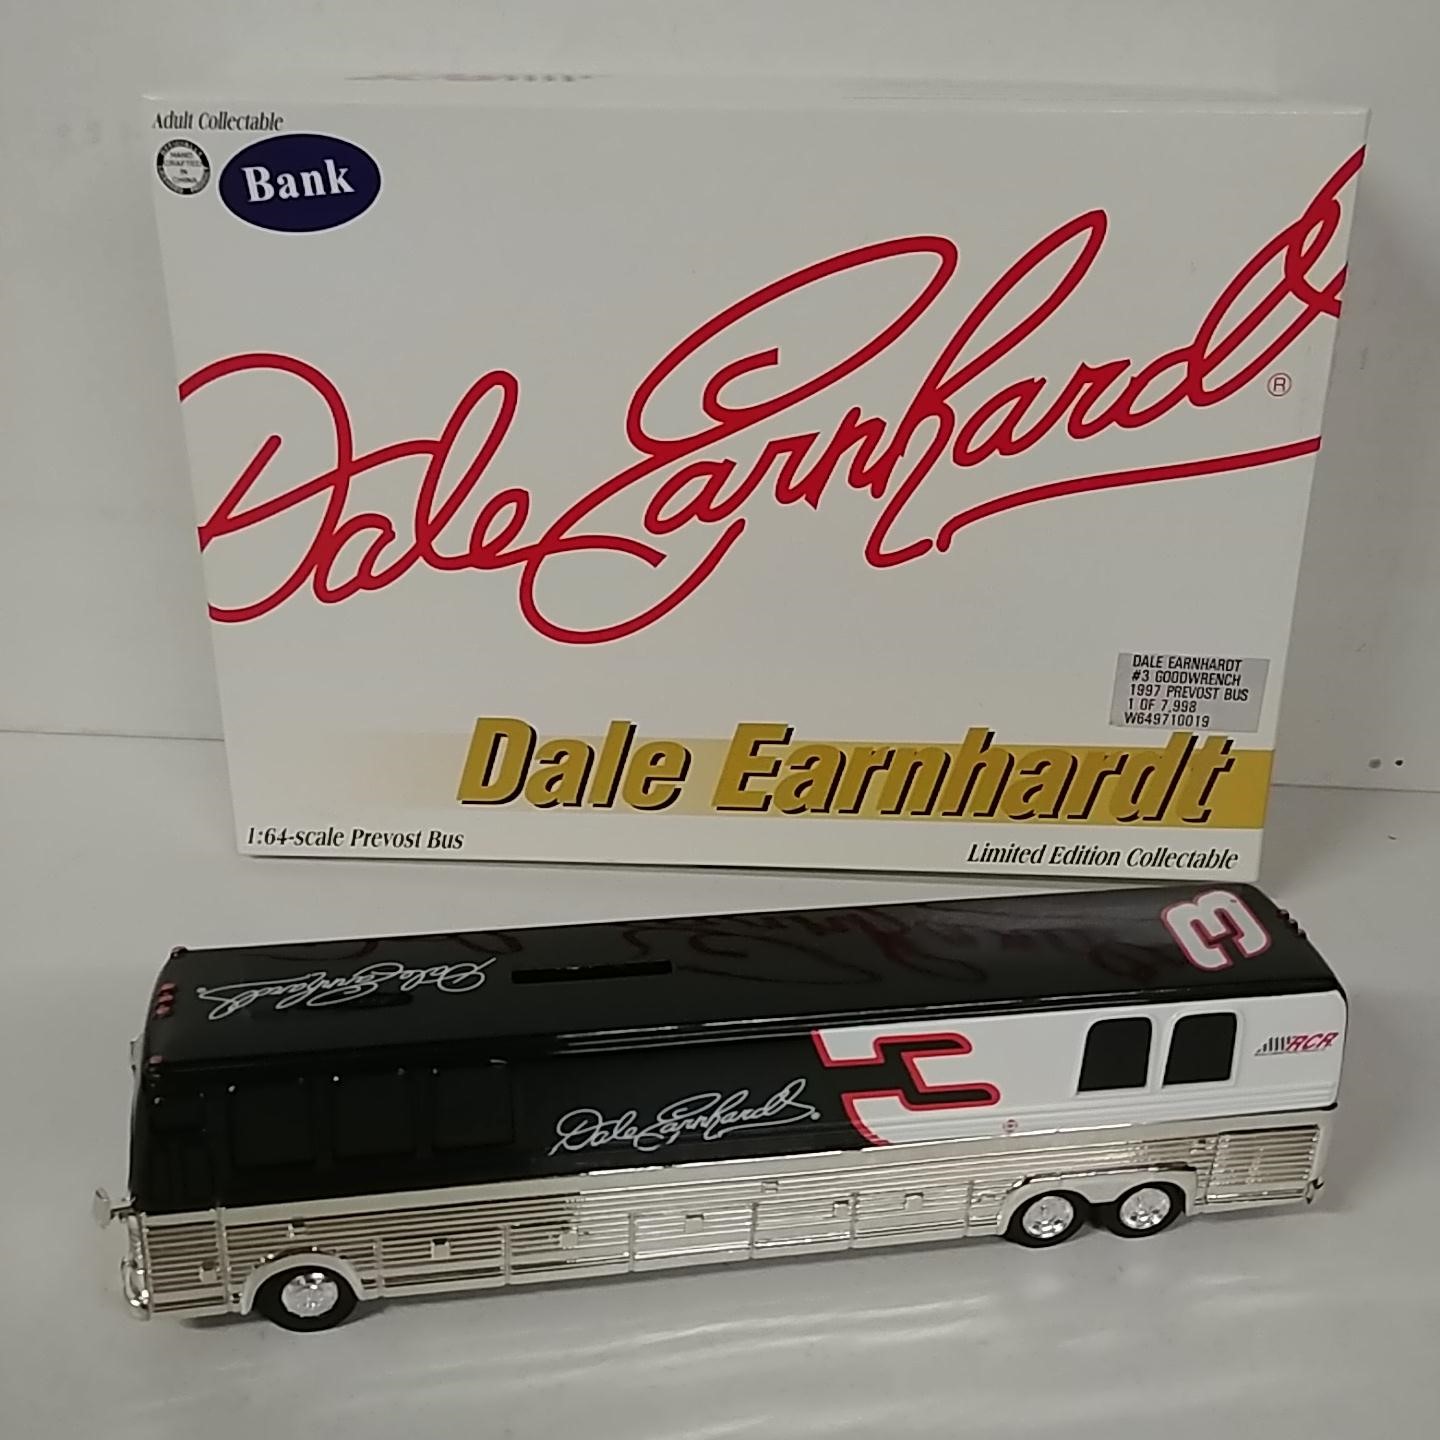 1997 Dale Earnhardt 1/64th Goodwrench "Prevost Bus" bank